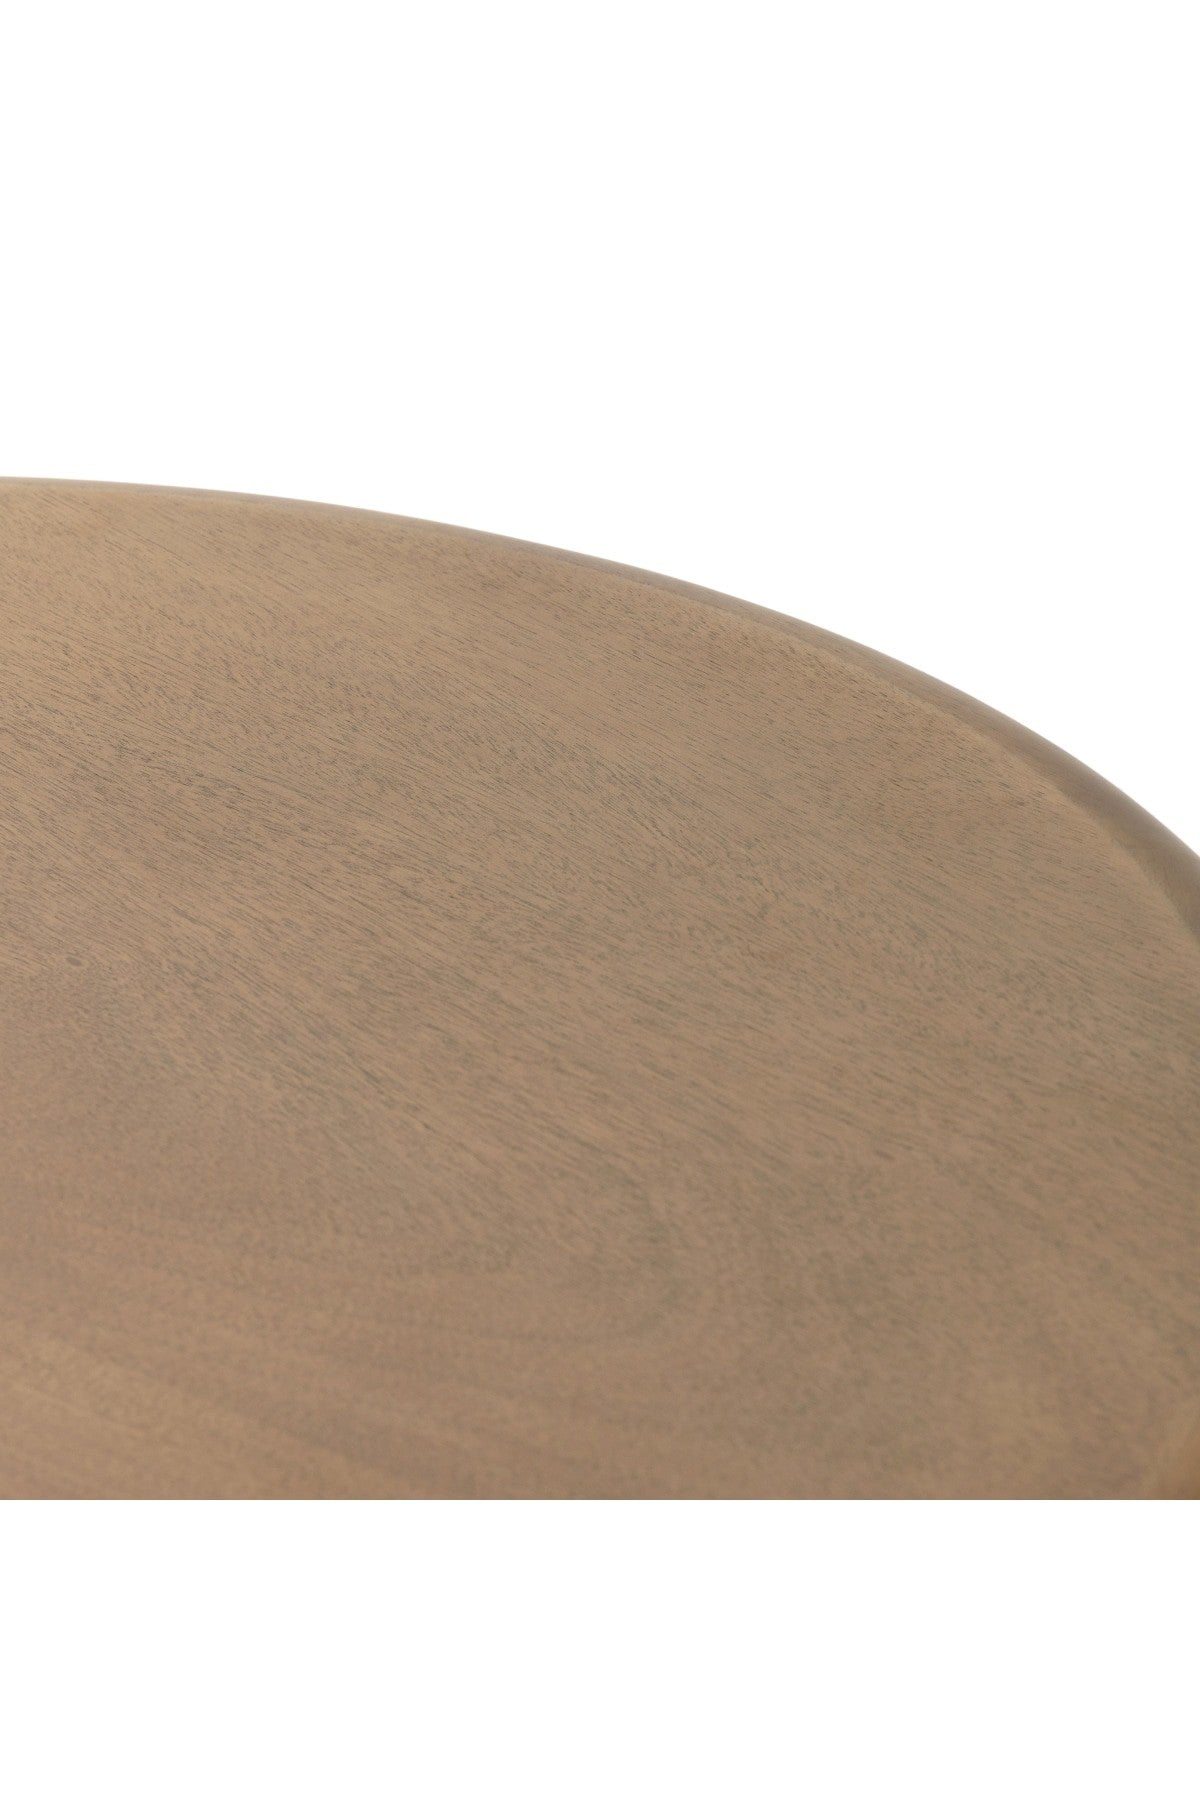 Tack Coffee Table - Burnished Parawood